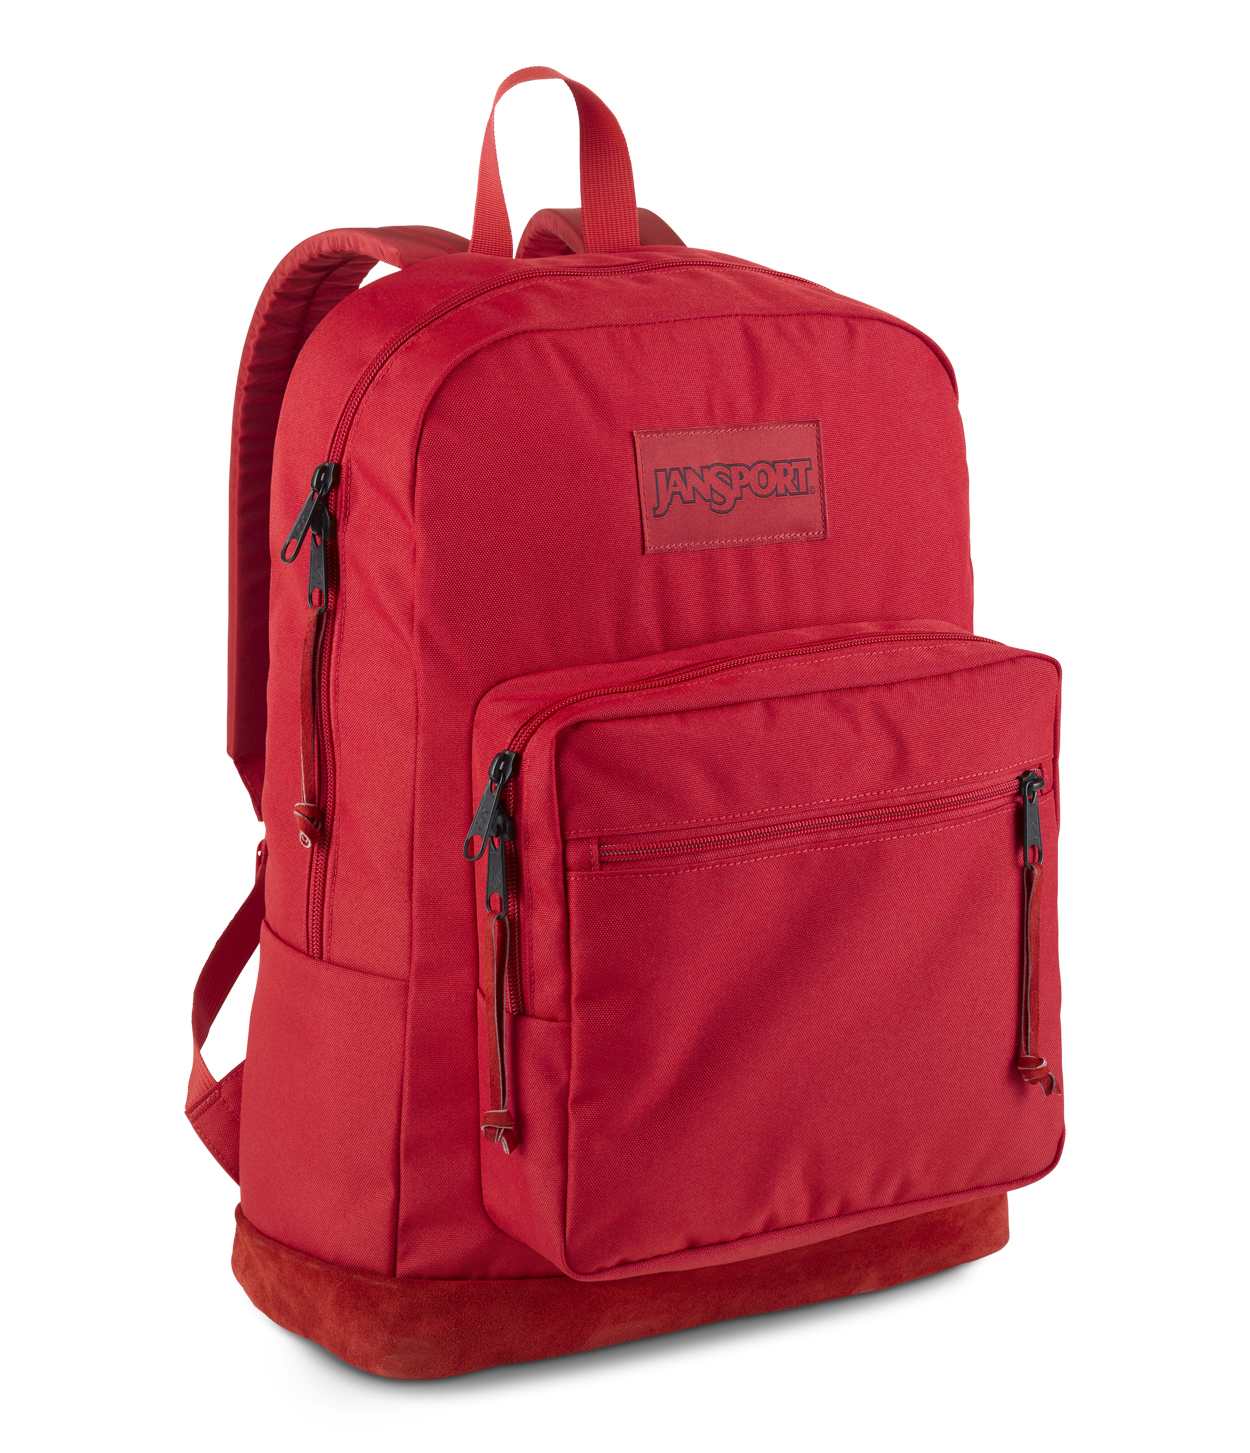 OMG, contest: win a Vampire Diaries/Jansport prize pack - OMG.BLOG